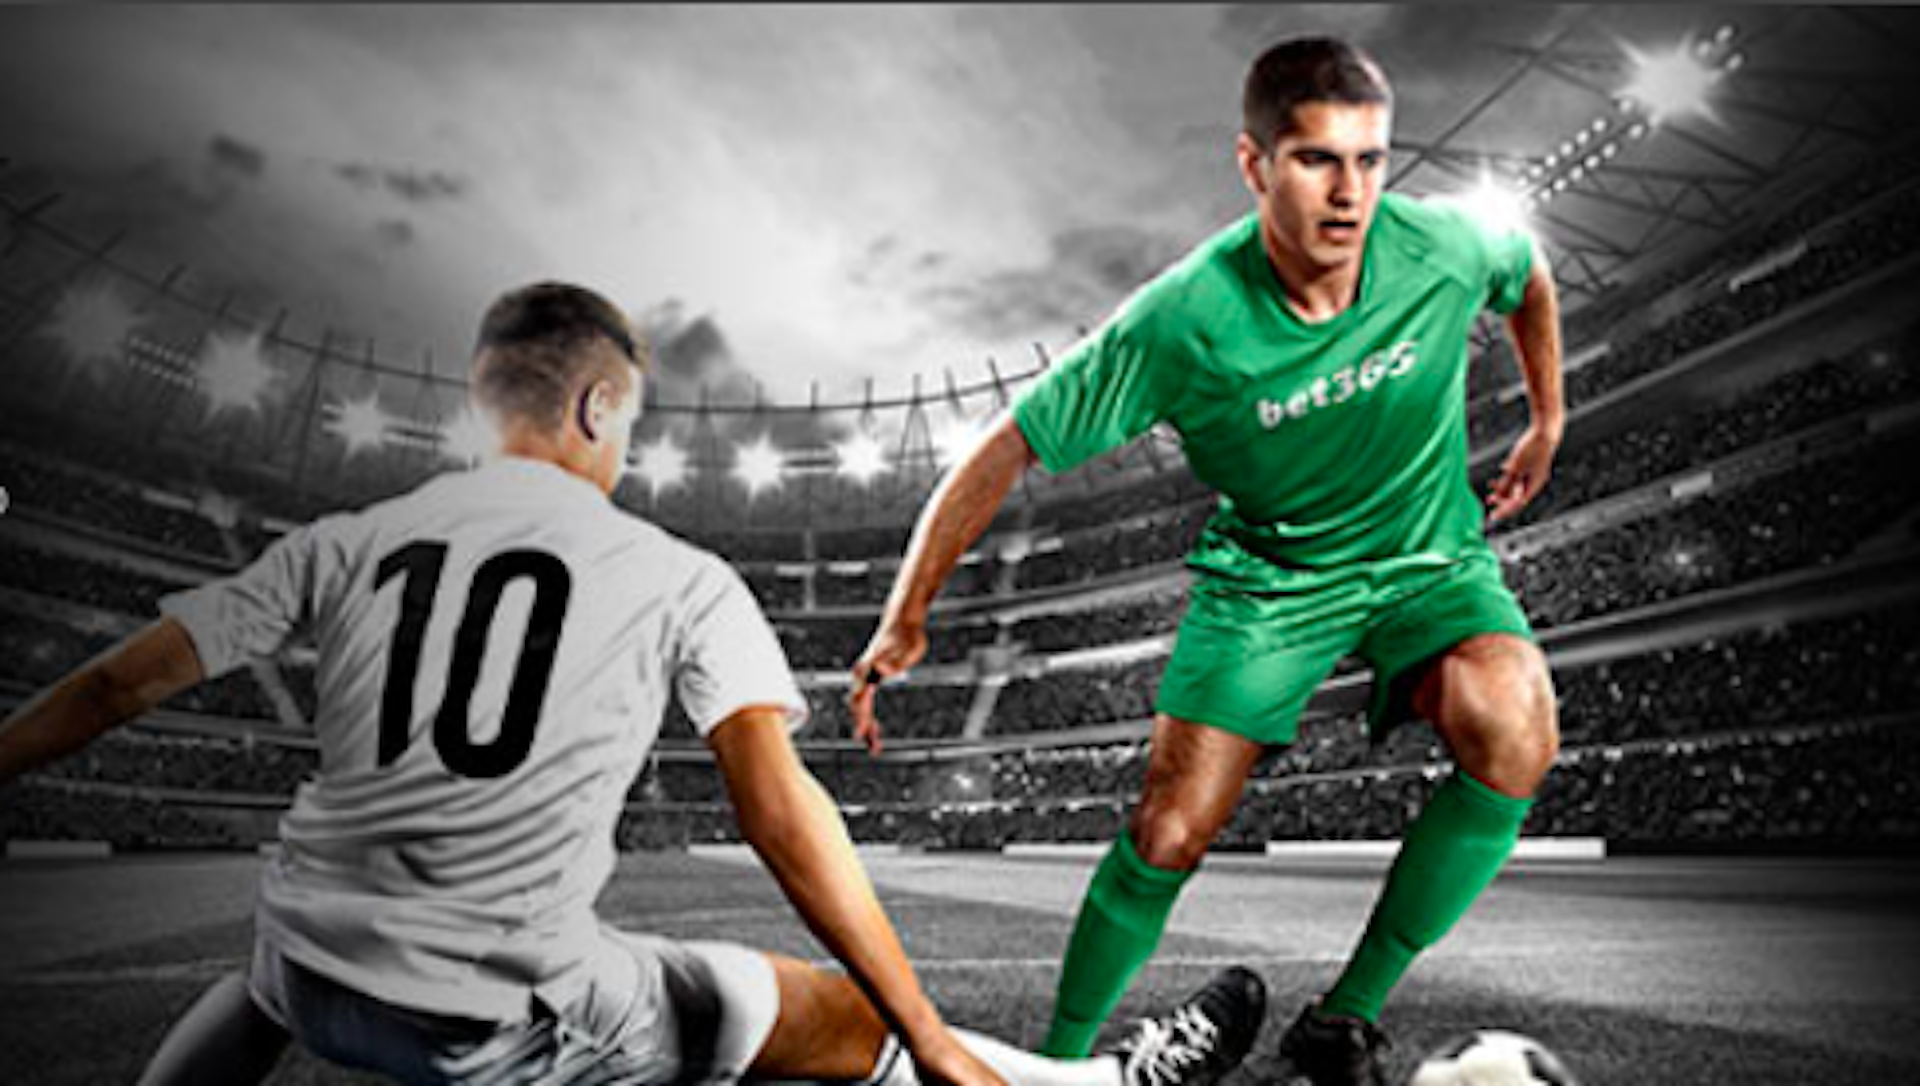 Bet365 Open Account Offer up to 100 USD Free Bet